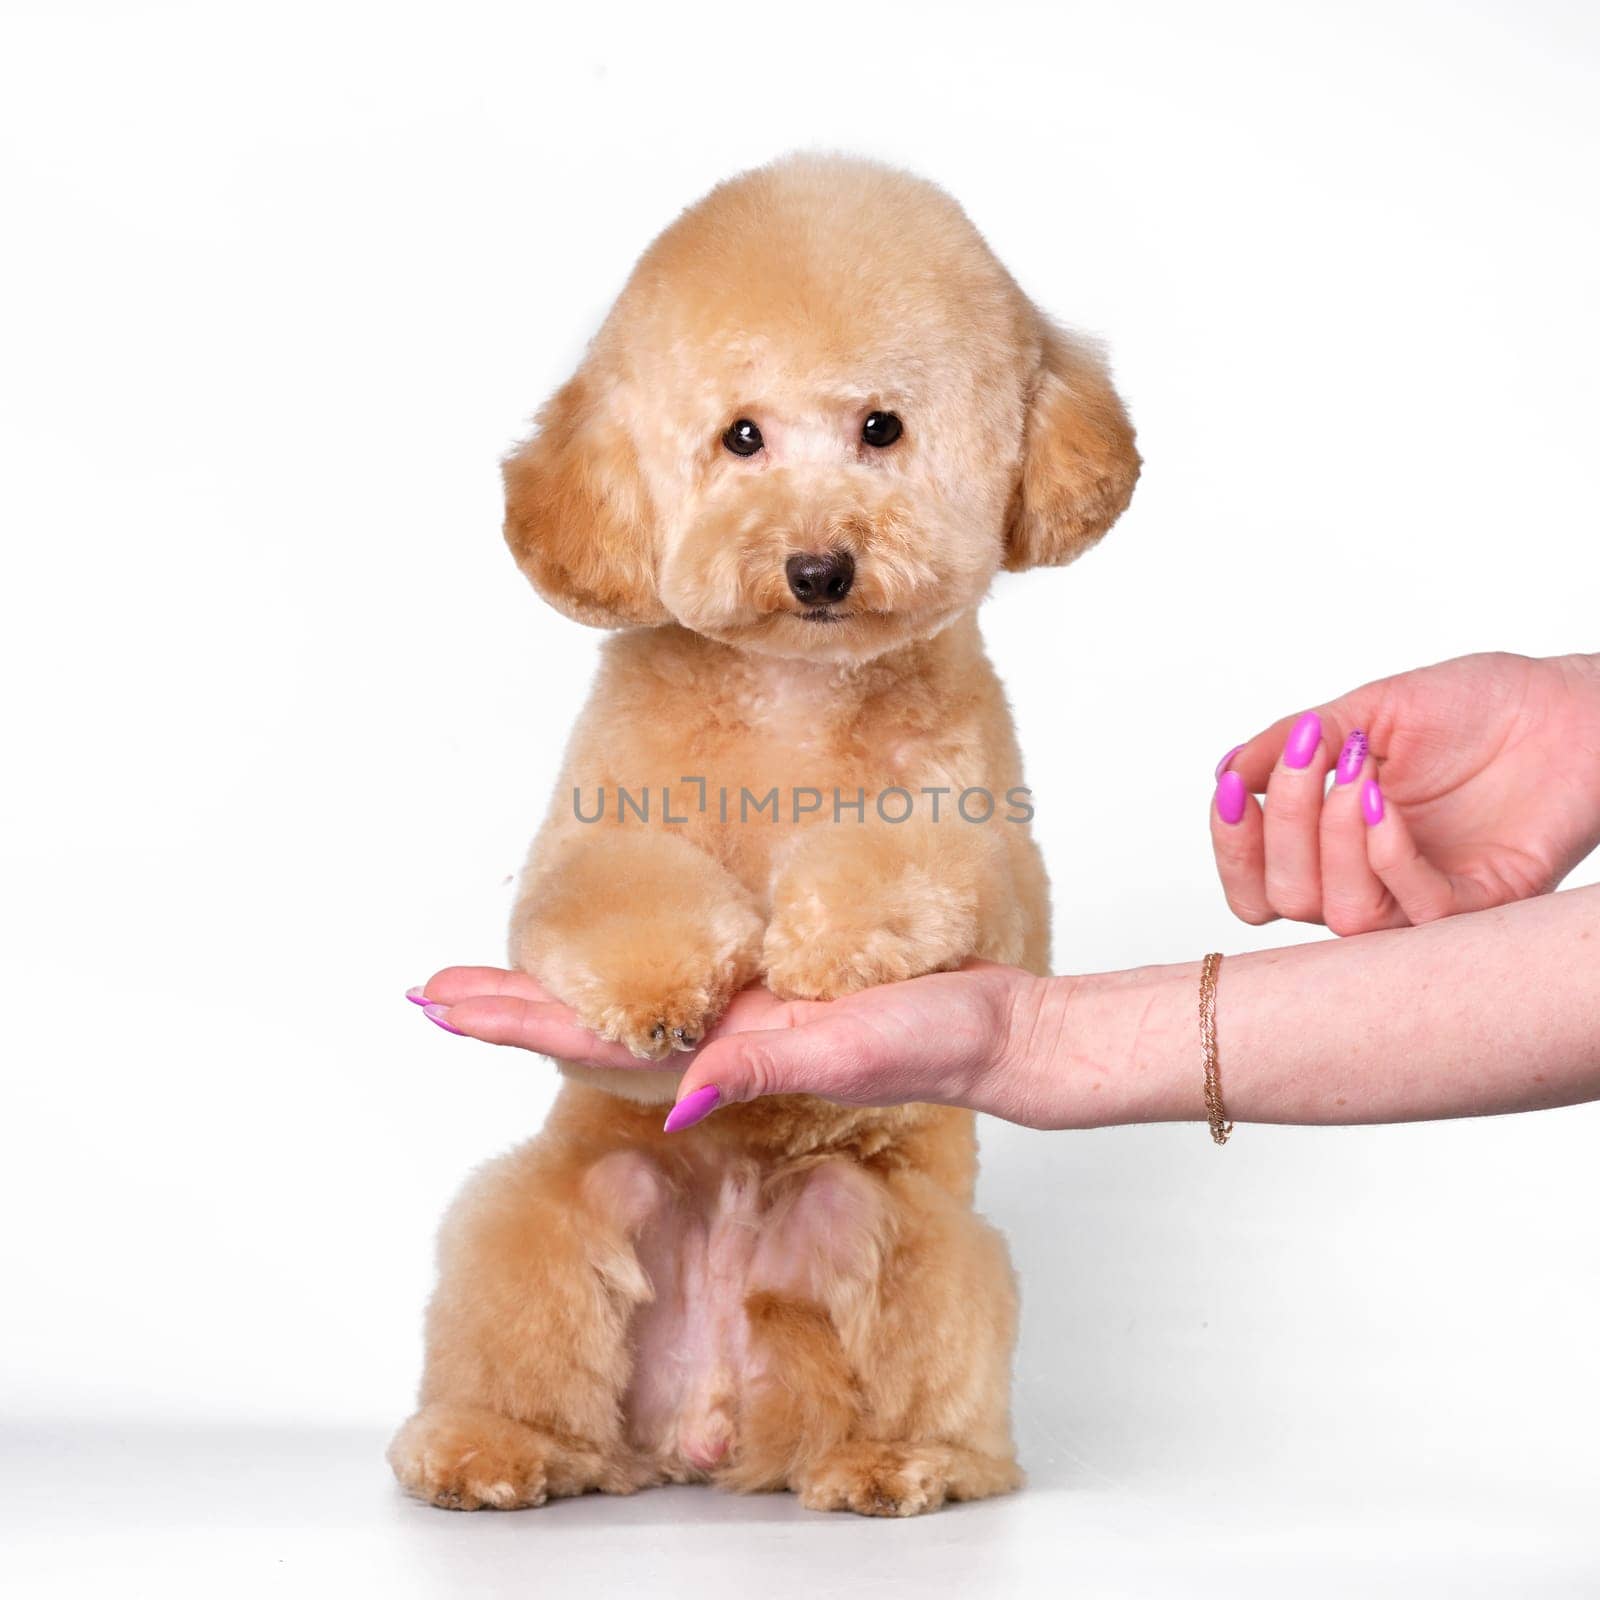 Apricot poodle puppy standing on its hind legs holding a woman's hand on a white background